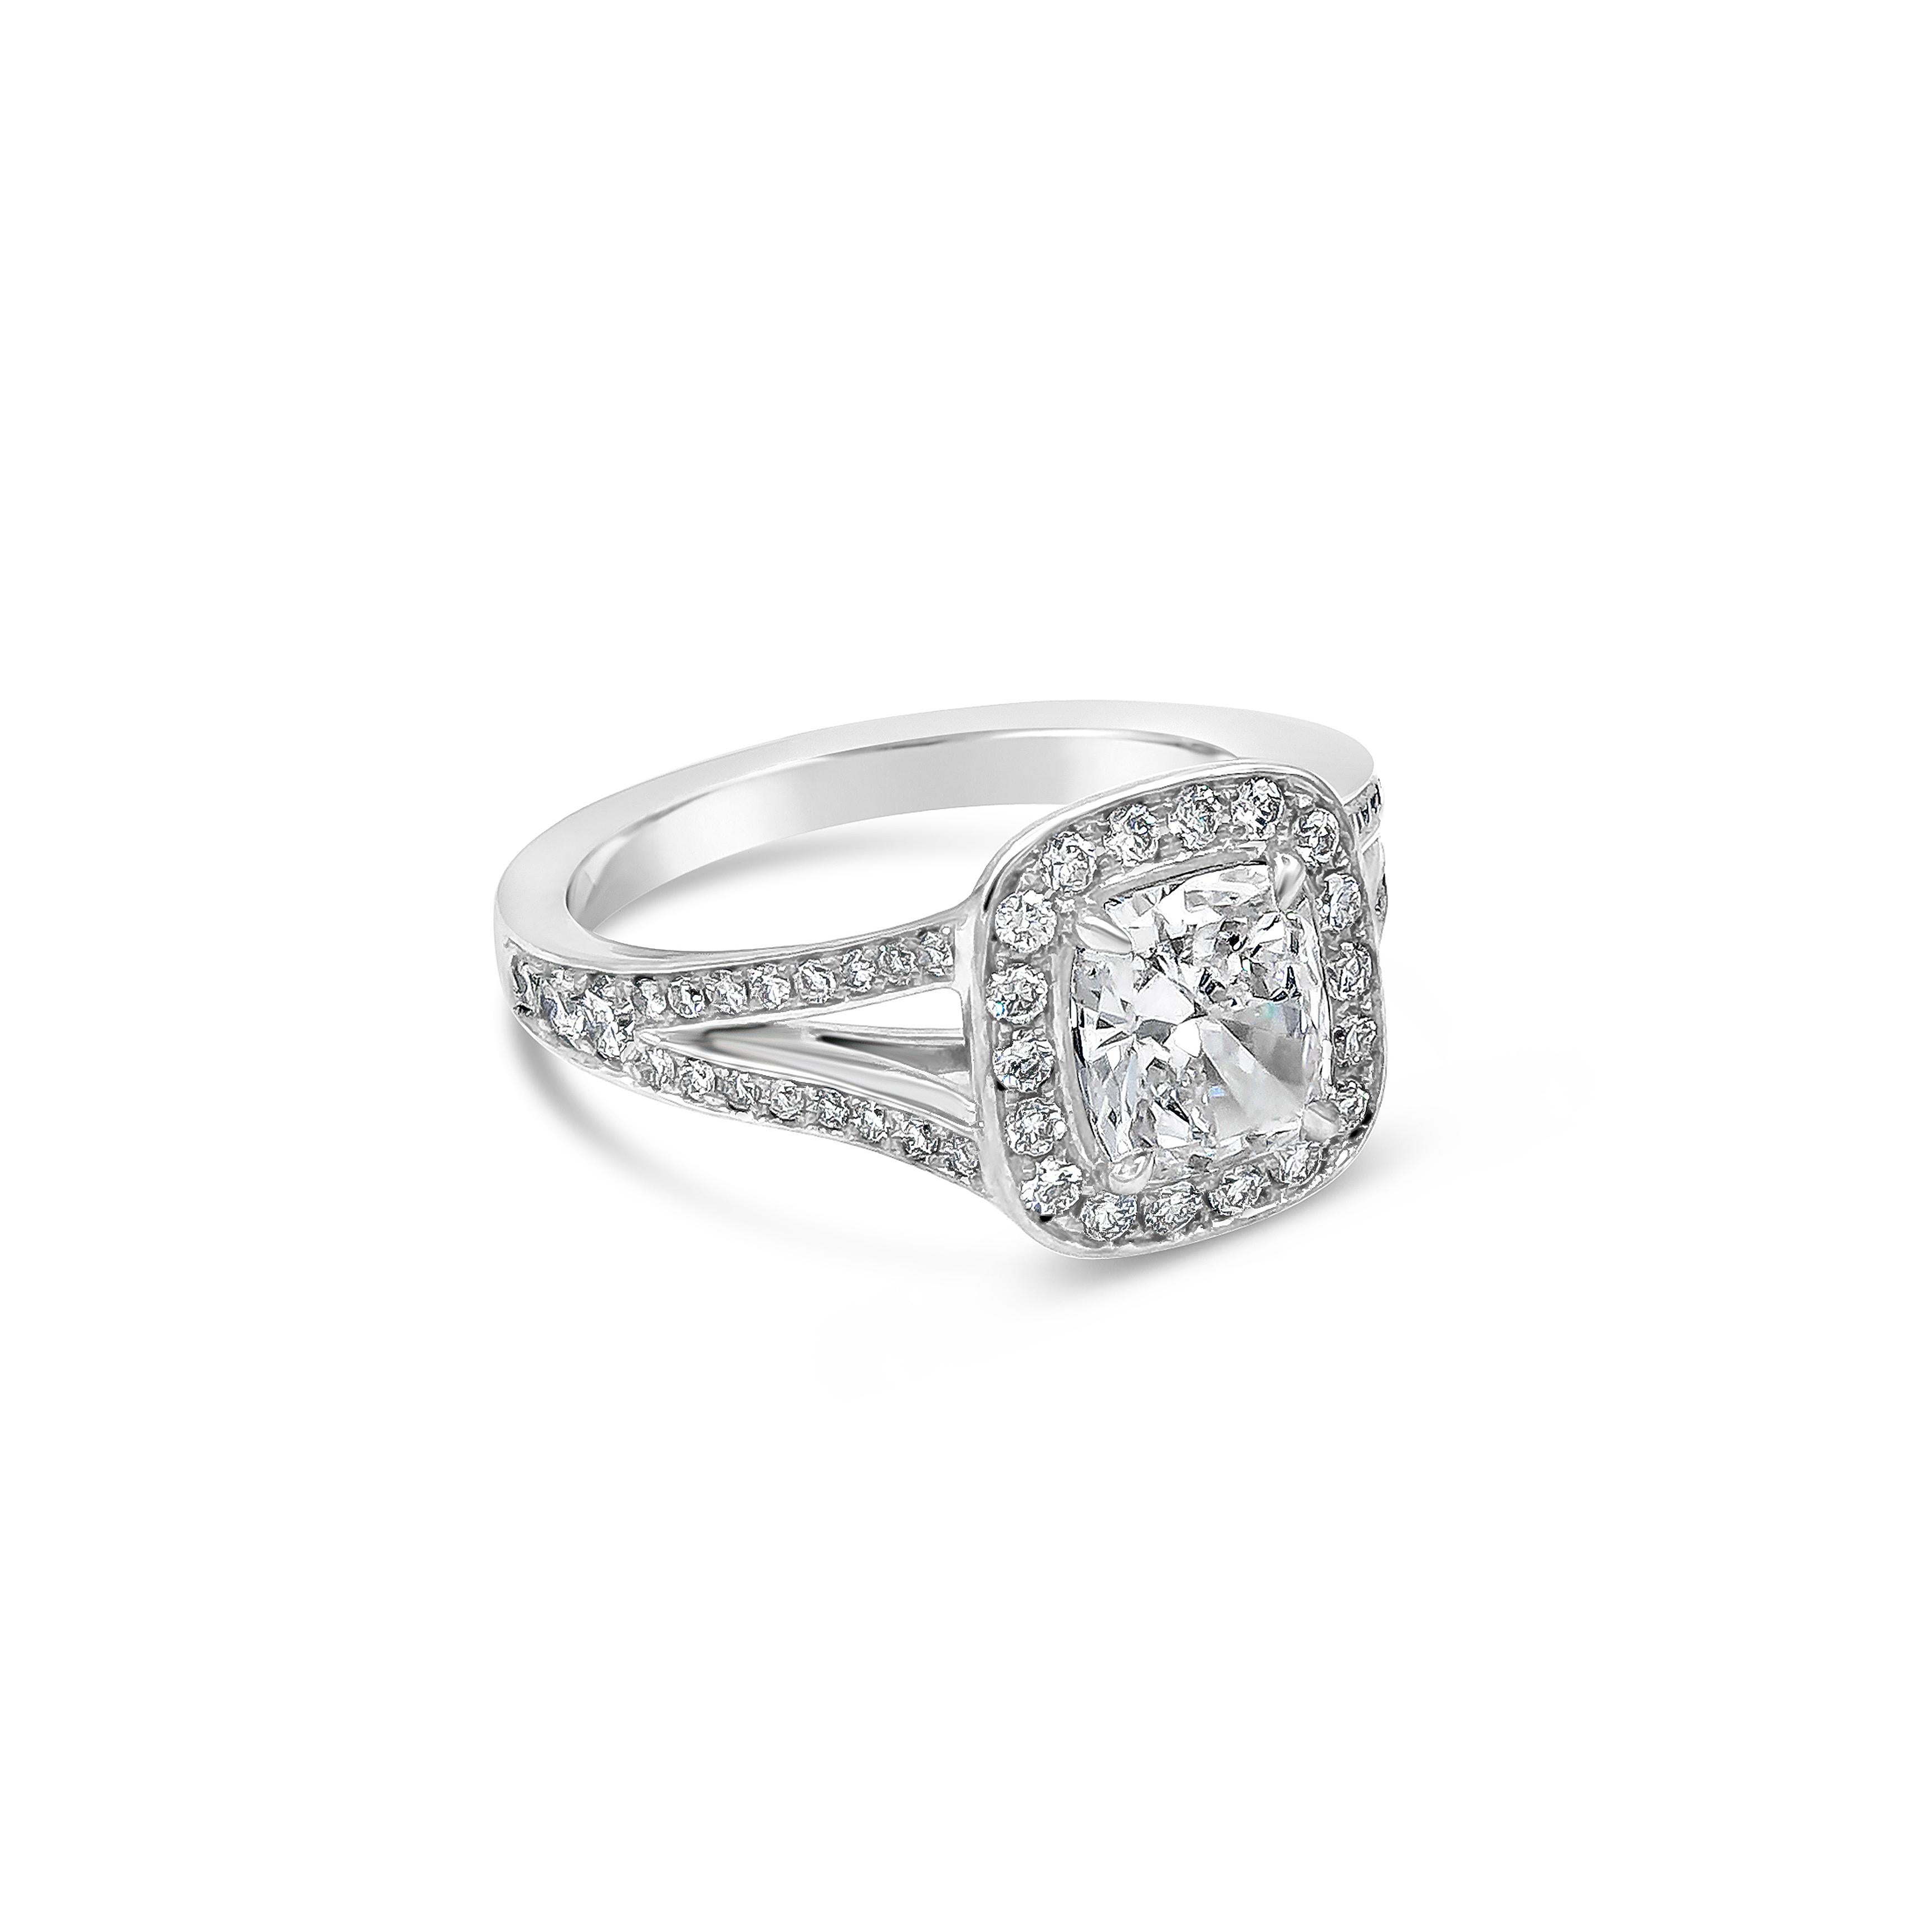 A chic and modern engagement ring style showcasing a 1.22 carat cushion cut diamond center stone, certified by GIA as D color and SI1 in clarity. Set in a halo bezel setting accented with diamonds weighing 0.50 carats total in a split-shank half